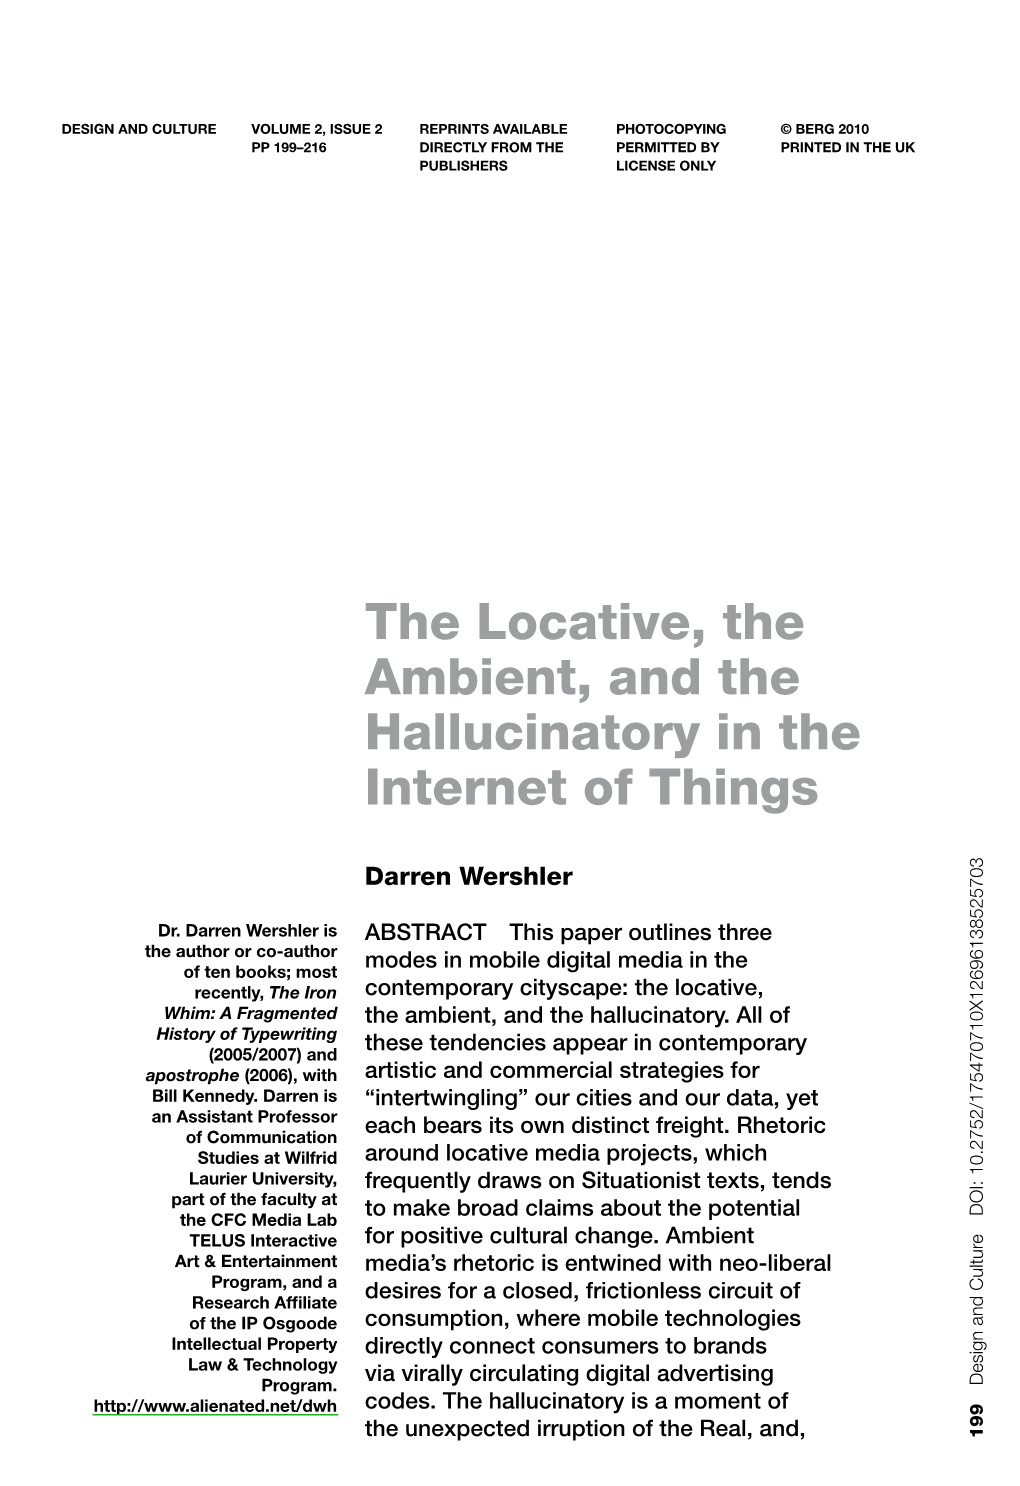 The Locative, the Ambient, and the Hallucinatory in the Internet of Things